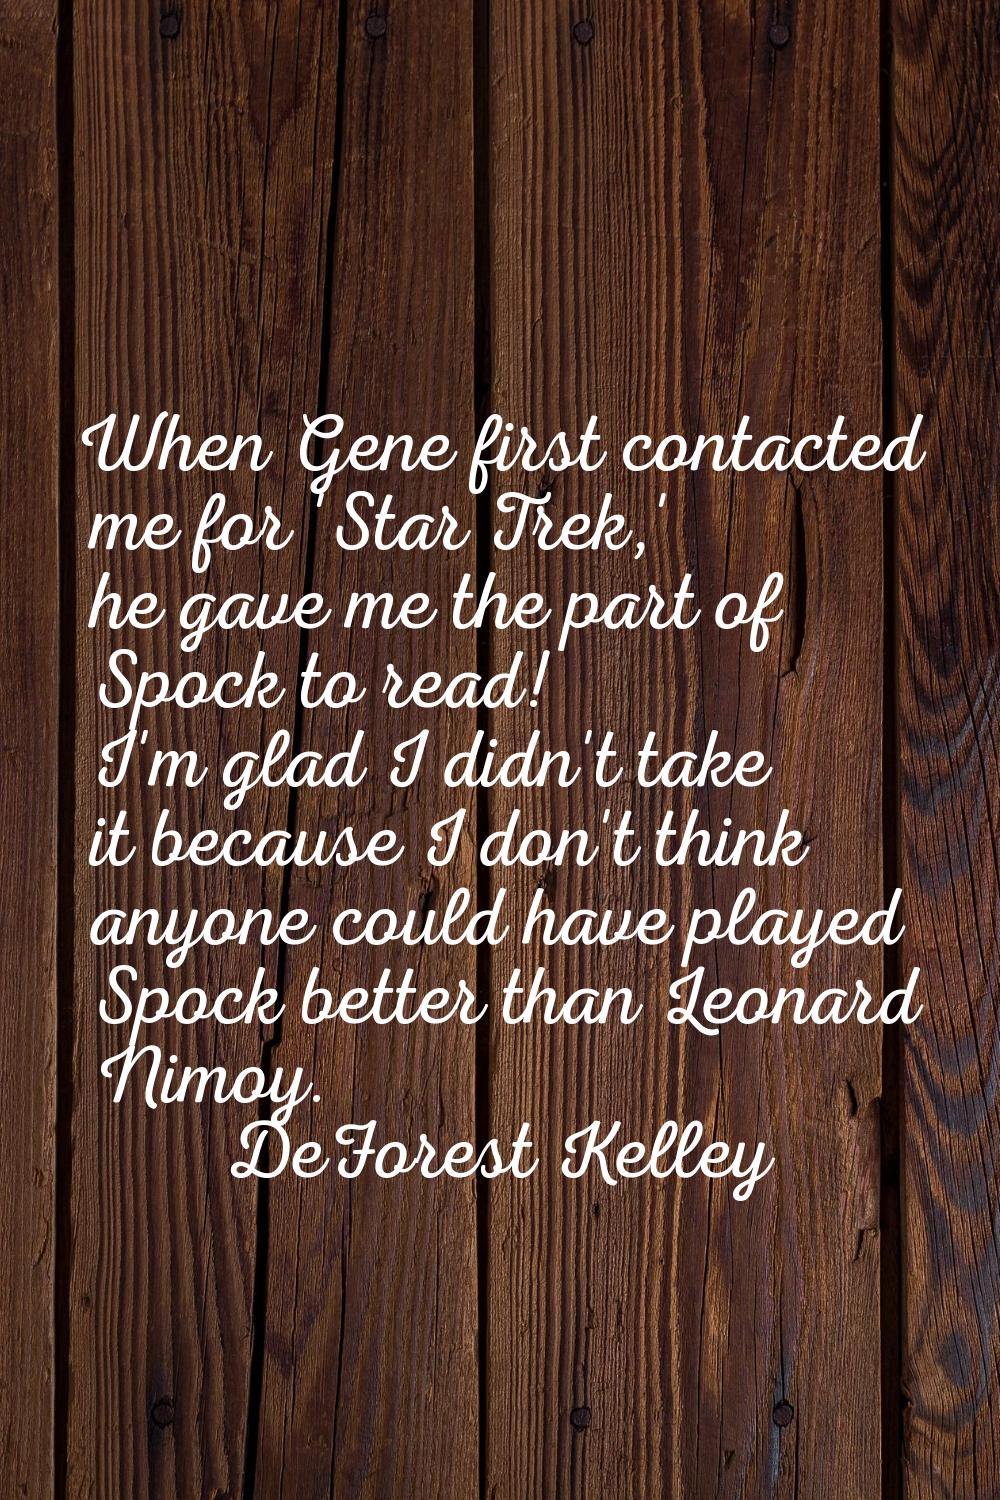 When Gene first contacted me for 'Star Trek,' he gave me the part of Spock to read! I'm glad I didn